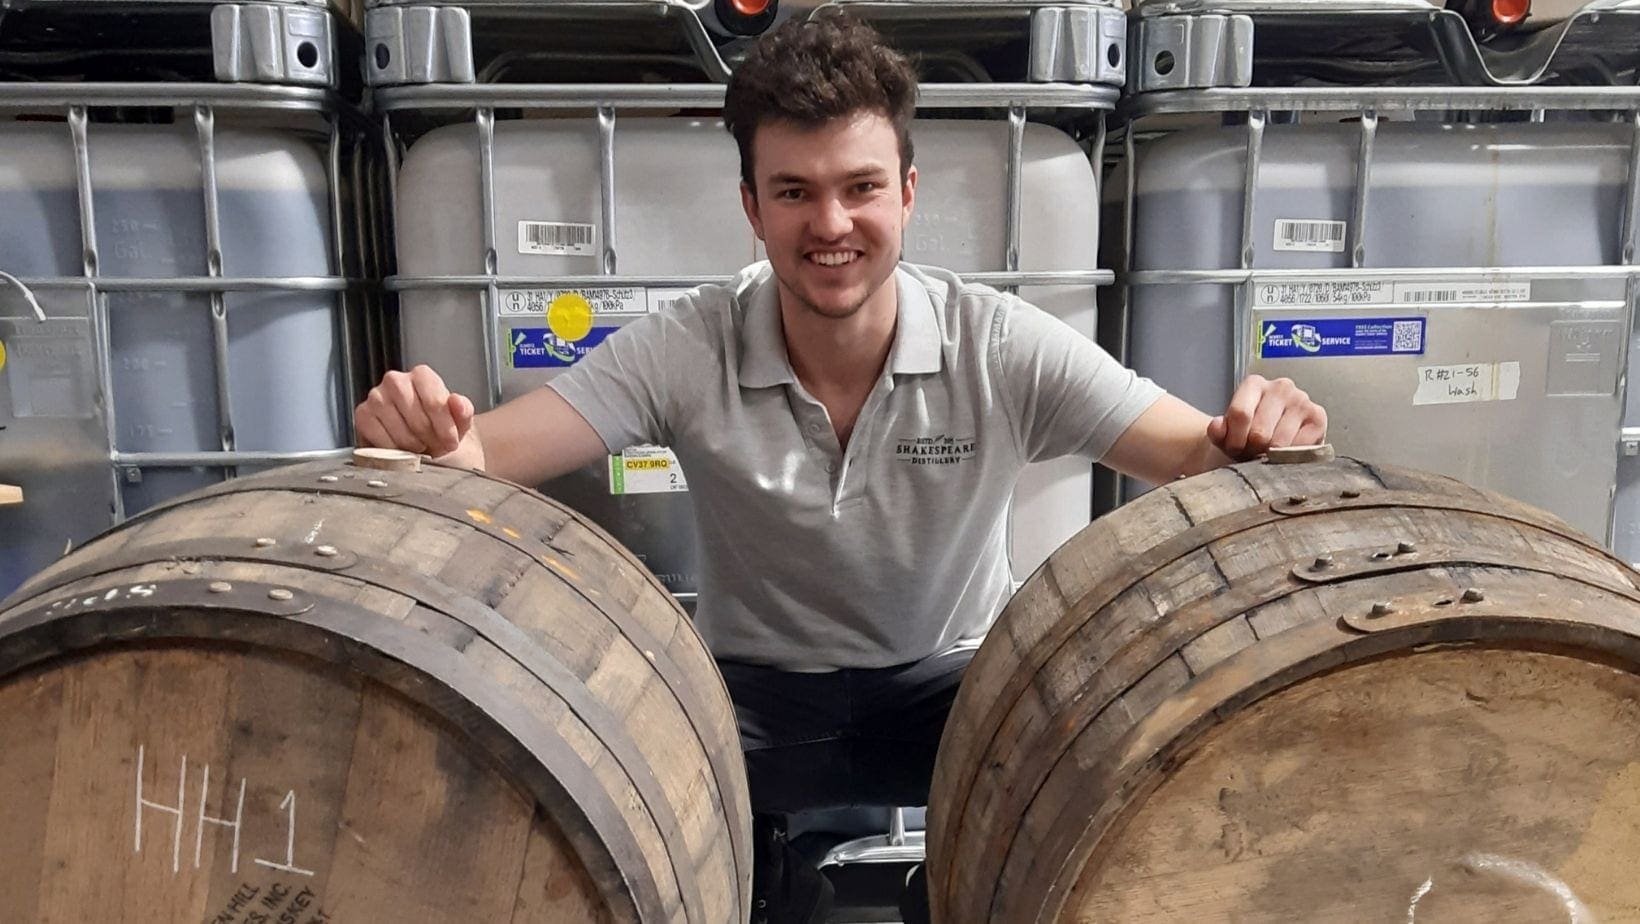 Shakespeare Distillery employee crouching and smiling behind two large wooden barrels